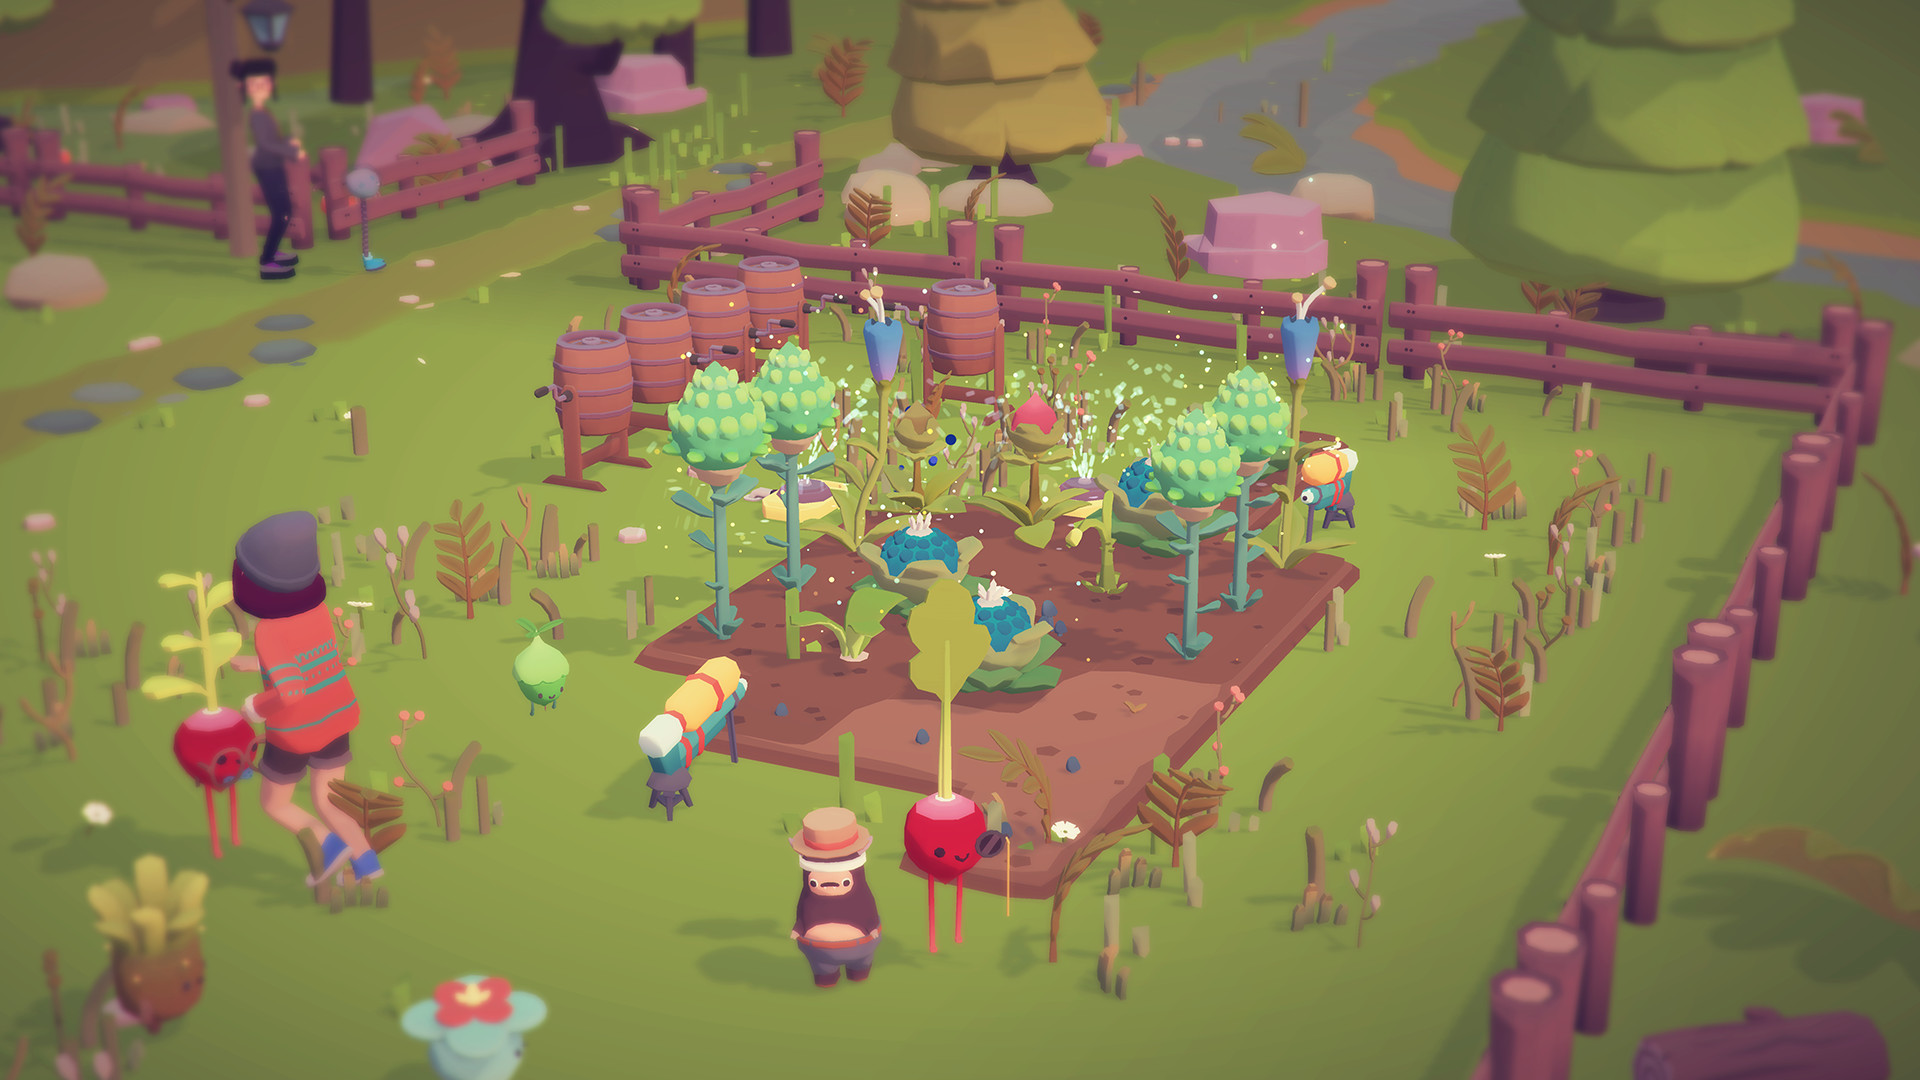 download free ooblets ps4